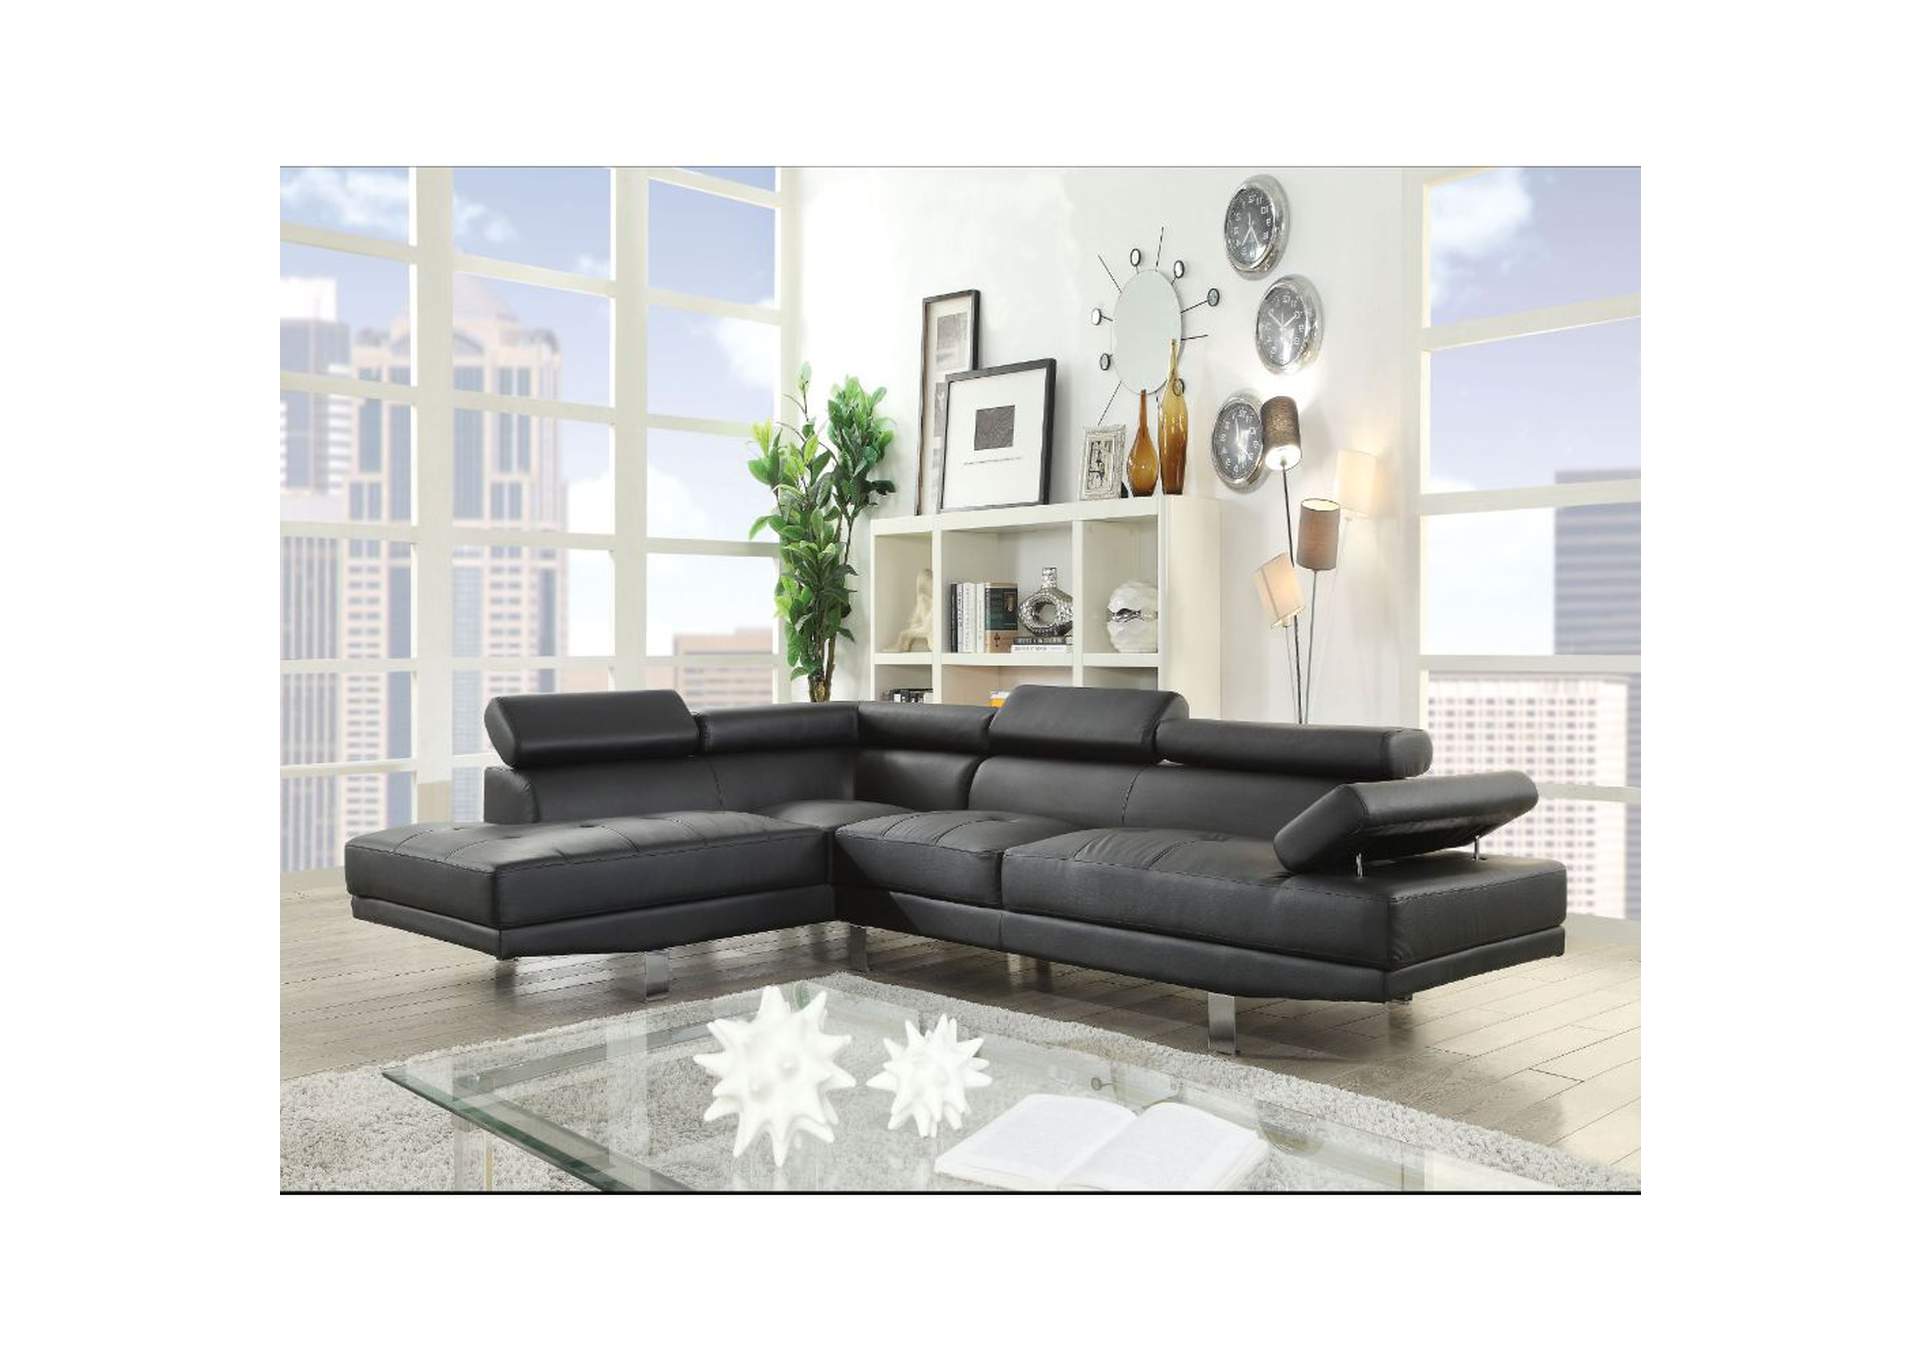 Connor Sectional Sofa,Acme